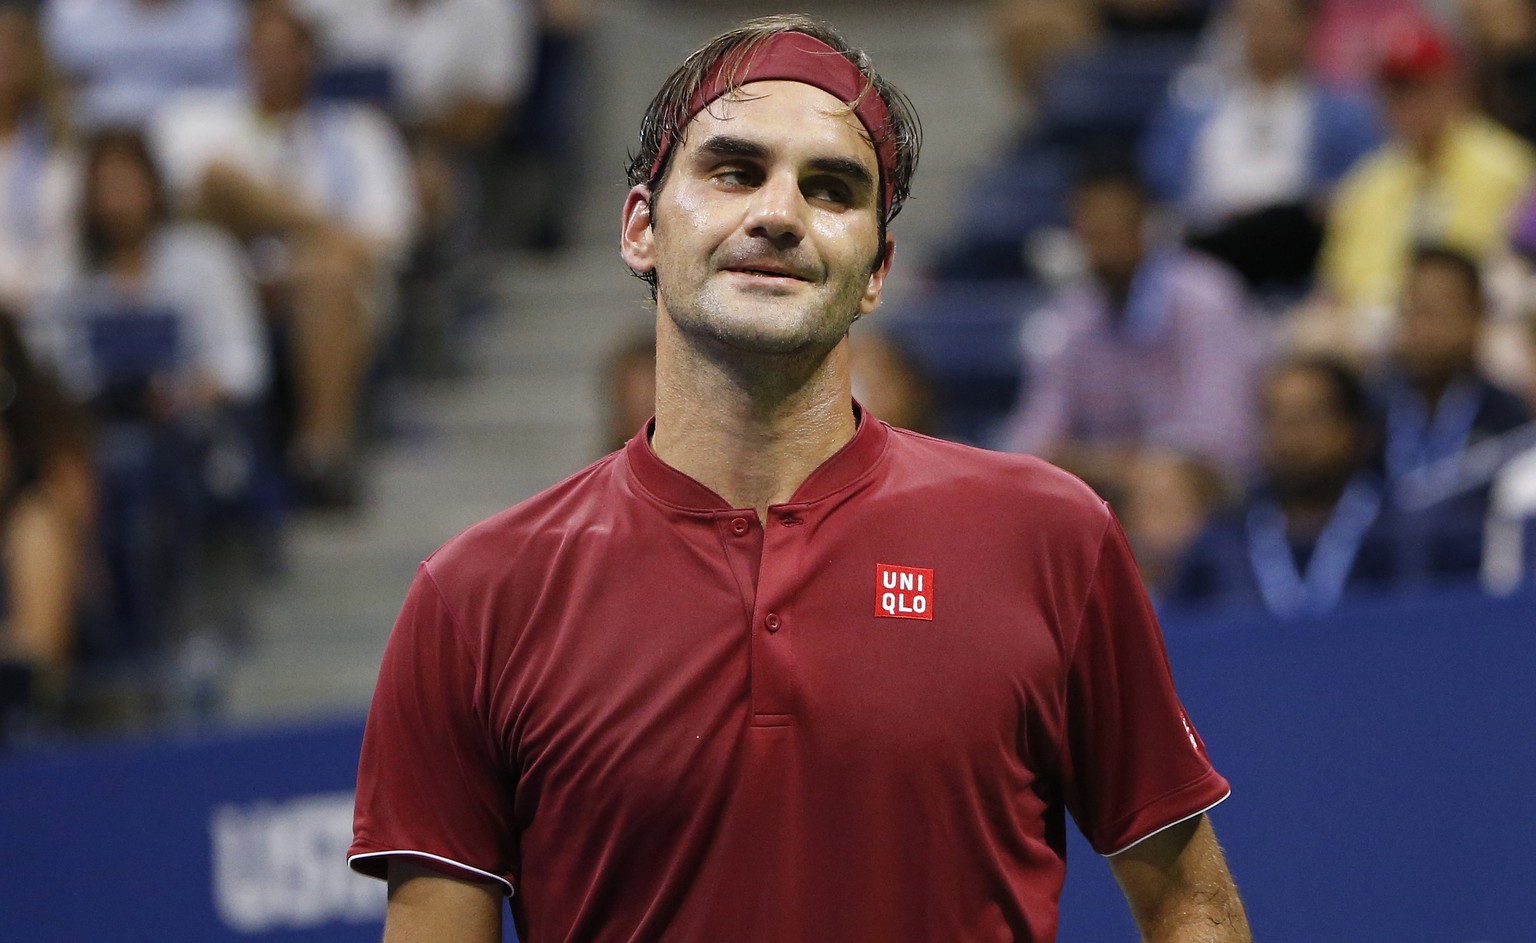 Roger Federer, of Switzerland, reacts after losing a point to John Millman, of Australia, during the fourth round of the U.S. Open tennis tournament, Monday, Sept. 3, 2018, in New York. (AP Photo/Jaso ...